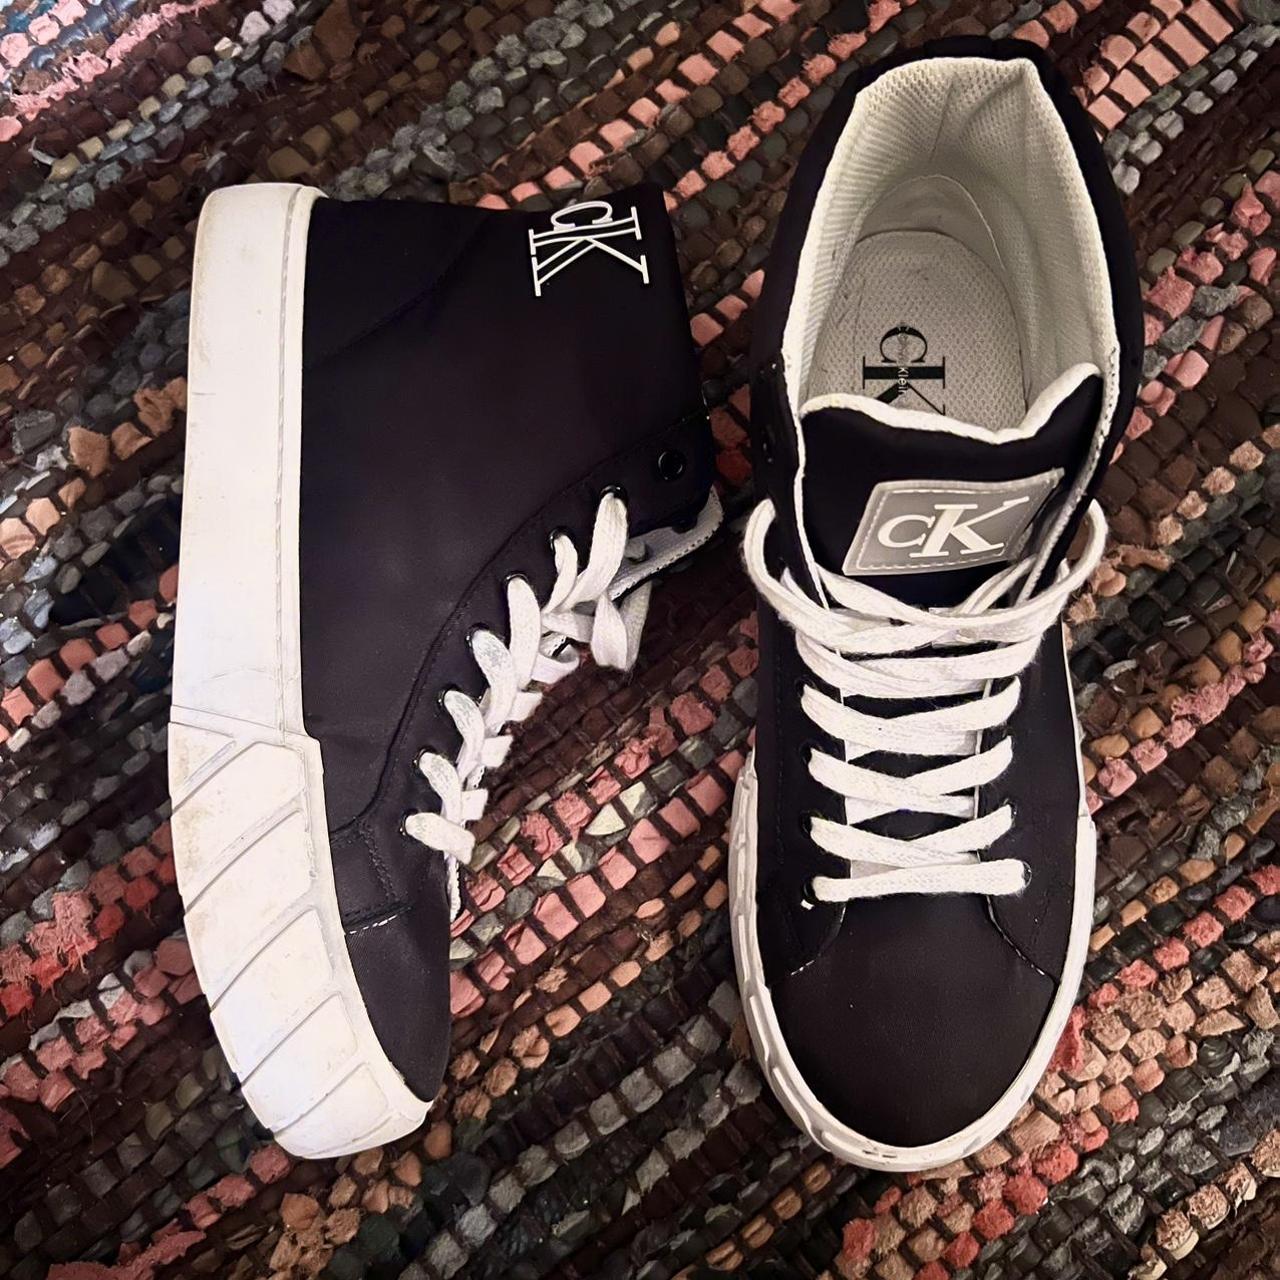 Calvin Klein Jeans Women's Black and White Trainers | Depop